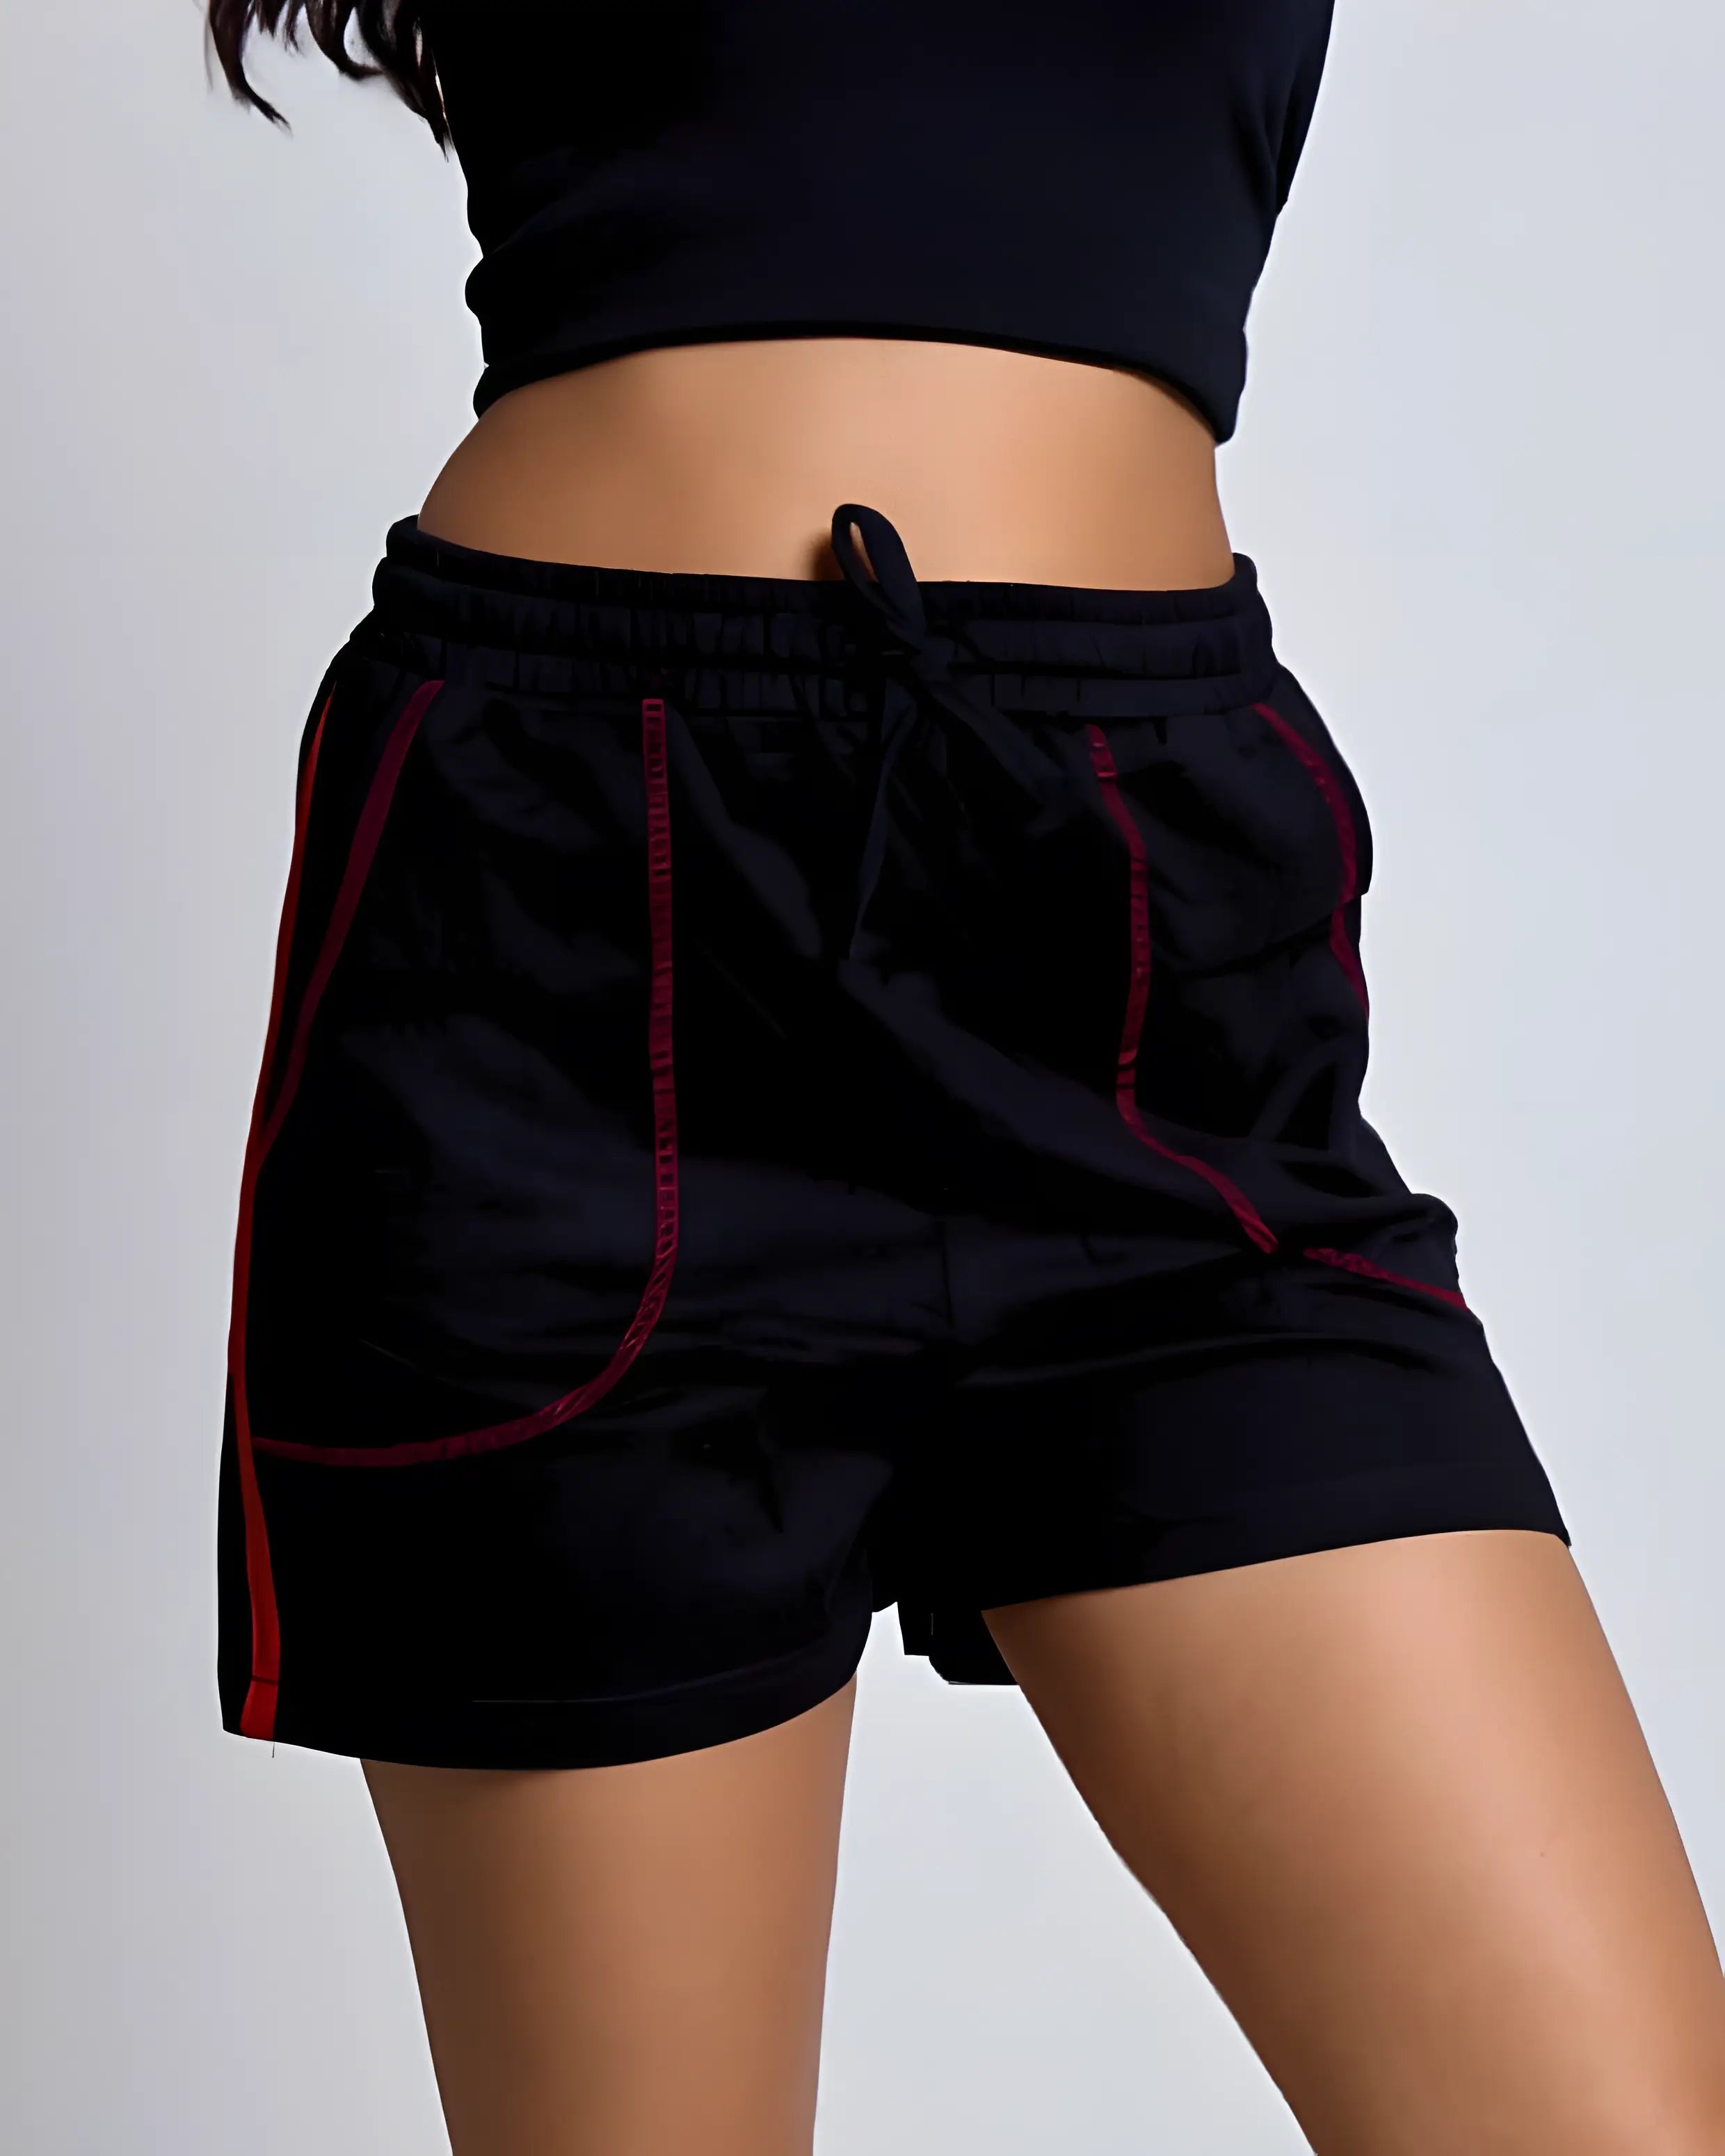 Comfortable Tracks, Shorts, & Lounge Wear for Women & Girls | LoveDky